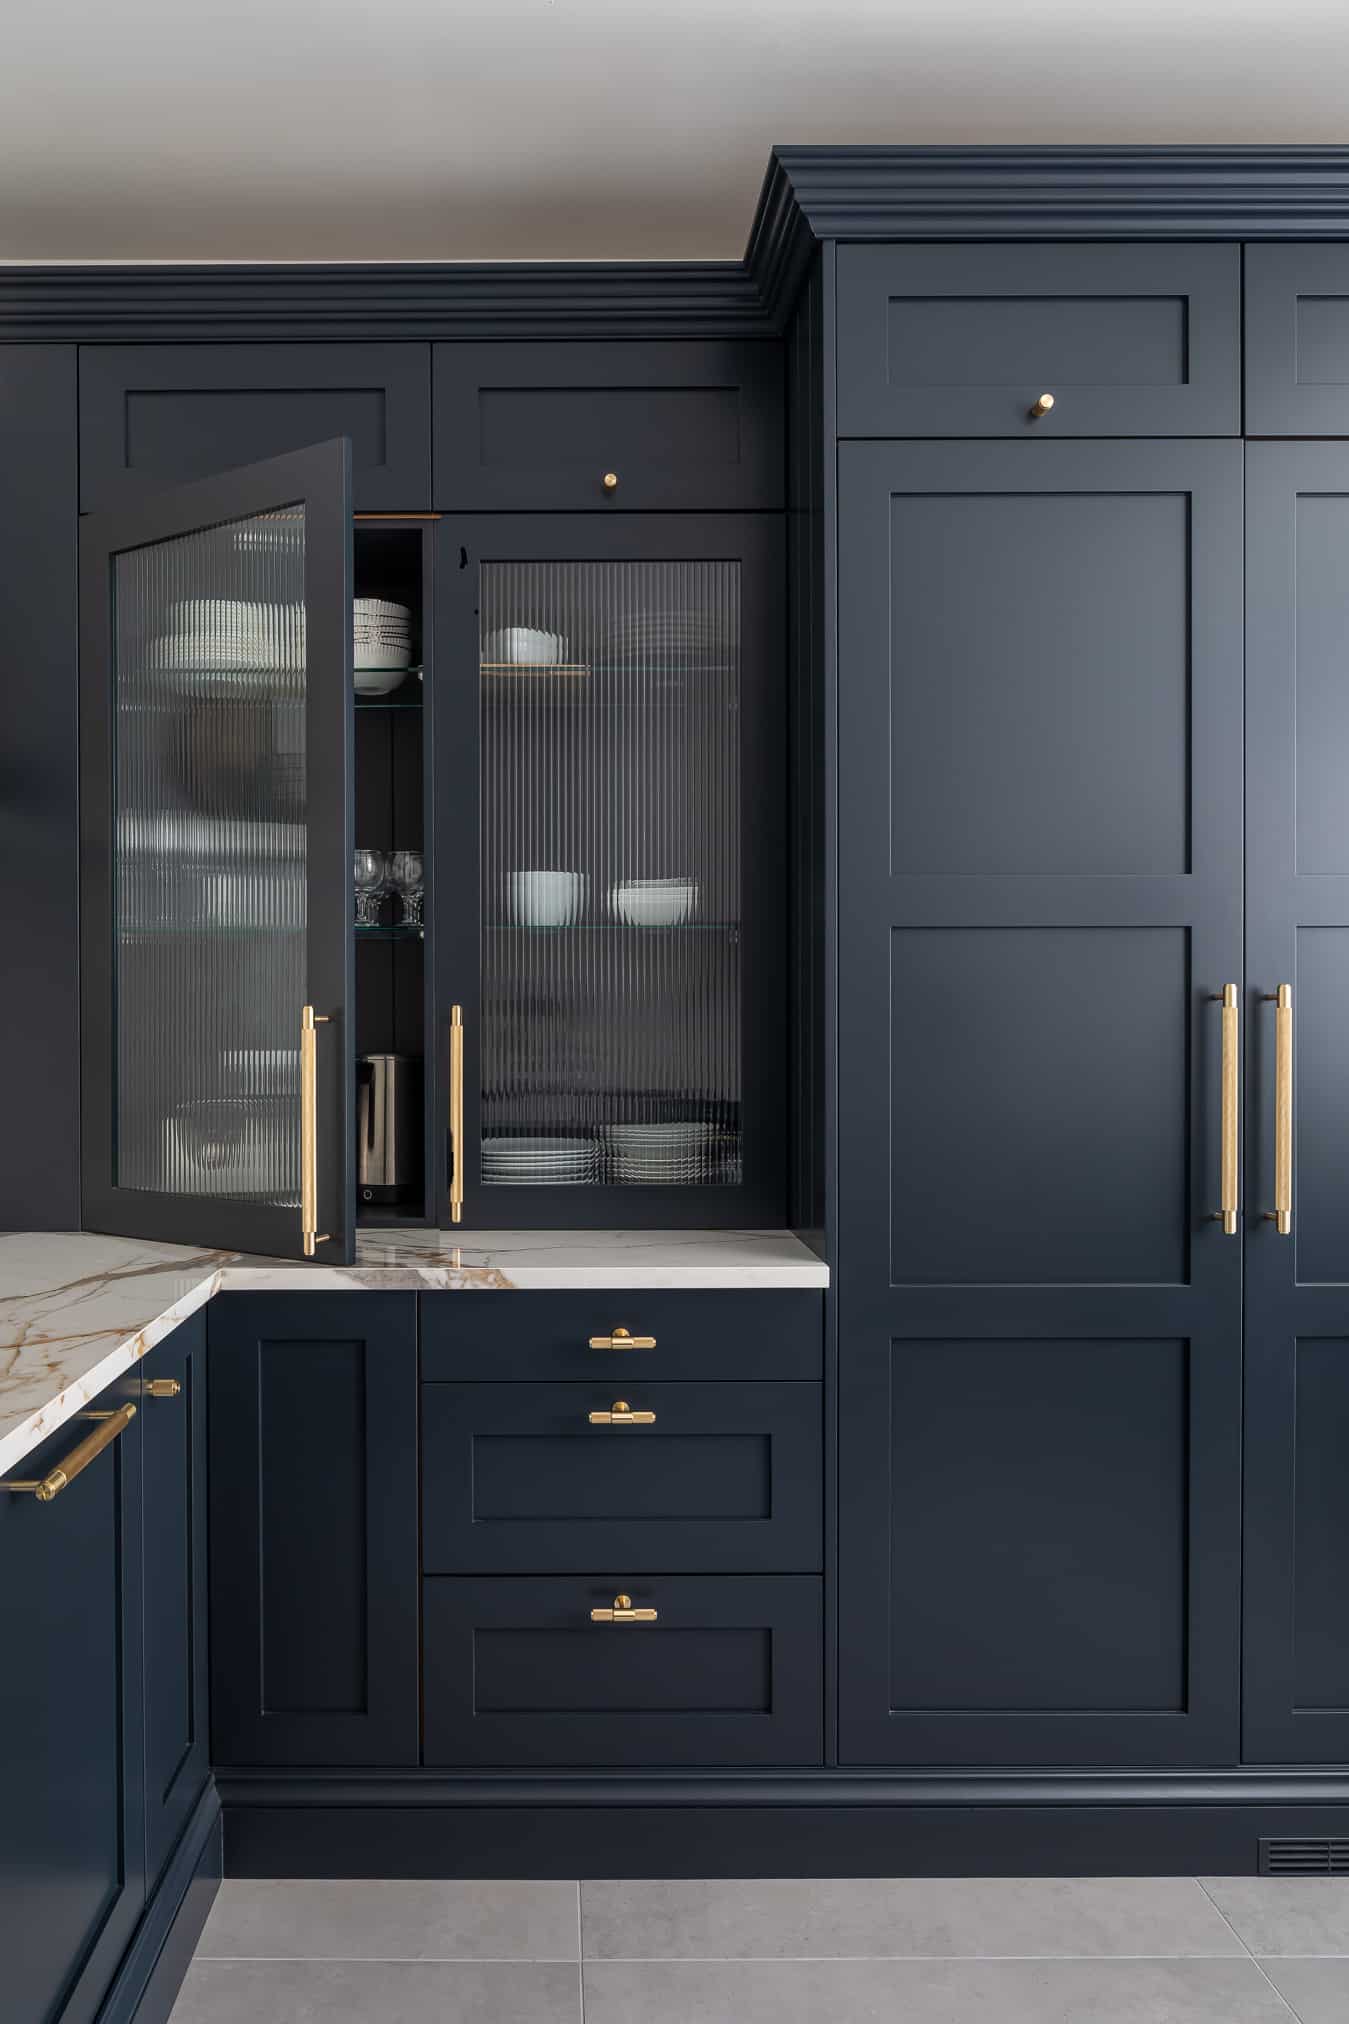 John Lewis of Hungerford luxury handmade shaker style kitchen cabinetry in dark blue